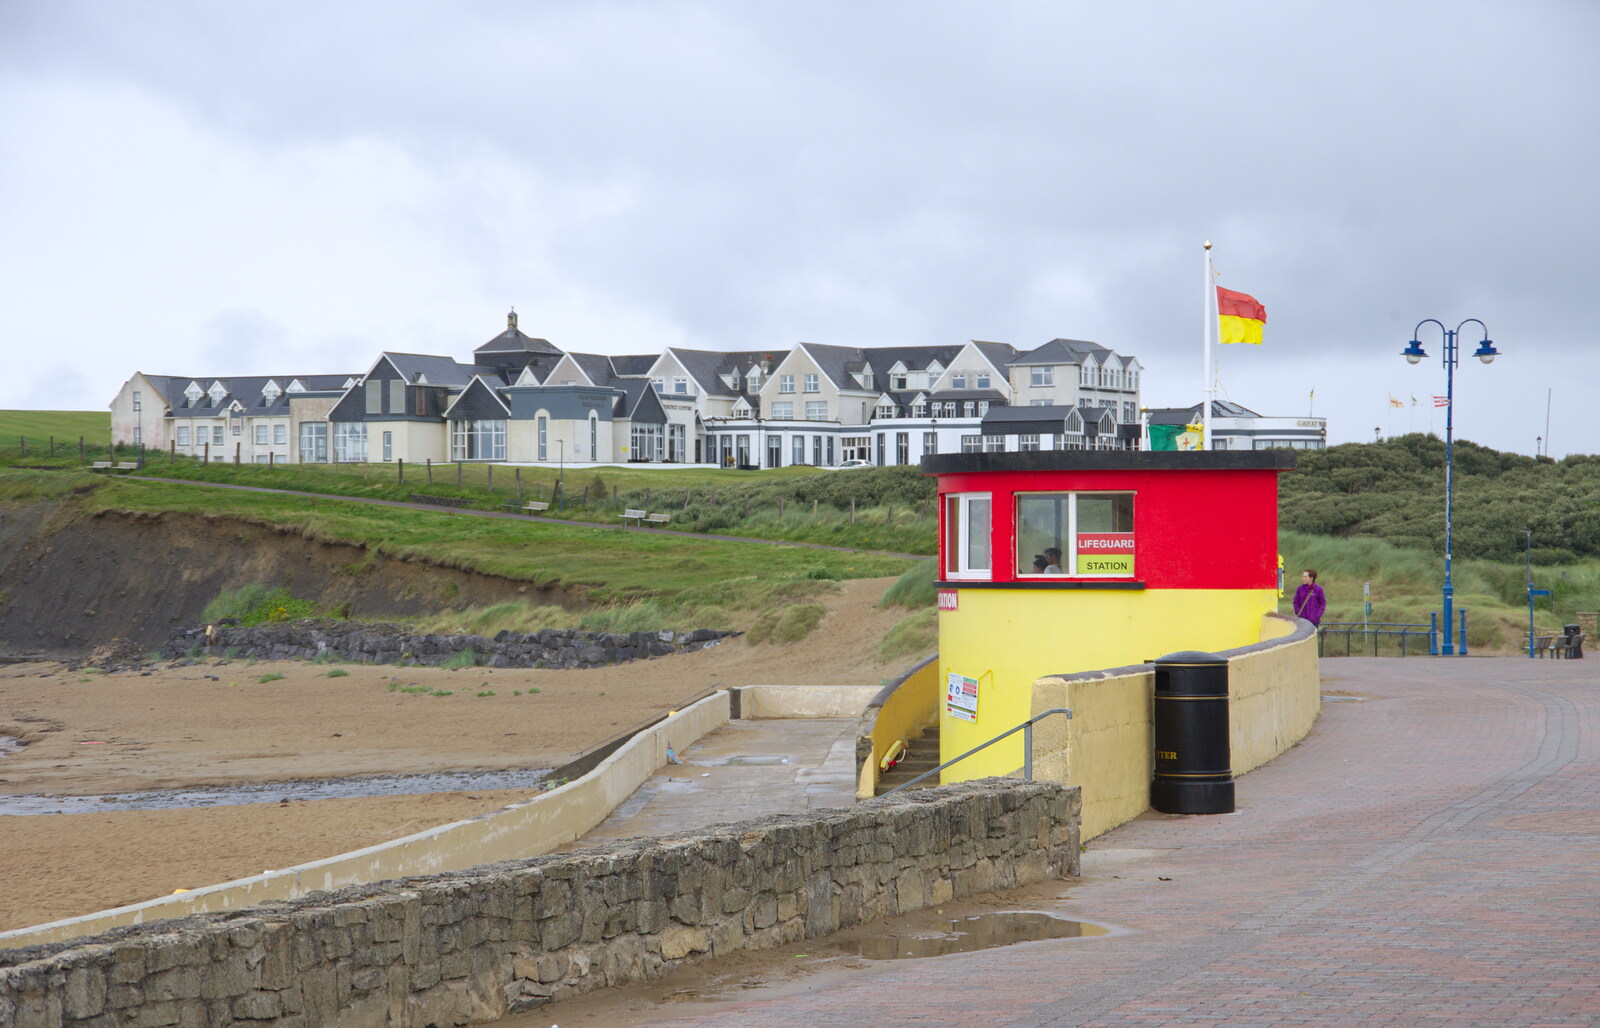 The Bundoran lifeguard station from A Day in Derry, County Londonderry, Northern Ireland - 15th August 2019